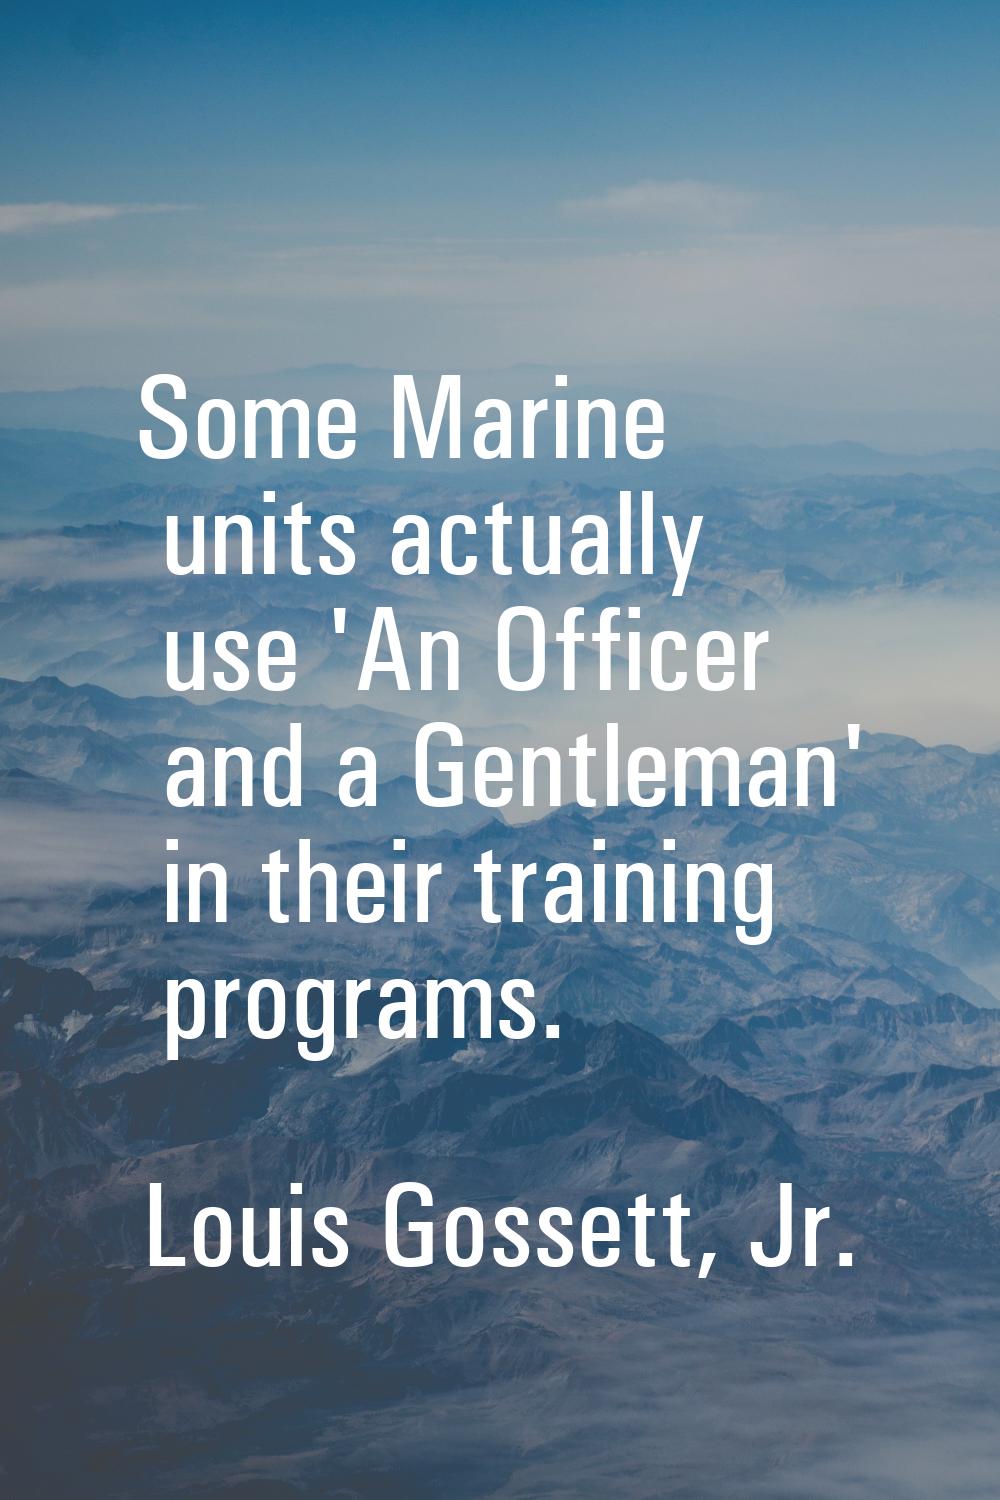 Some Marine units actually use 'An Officer and a Gentleman' in their training programs.